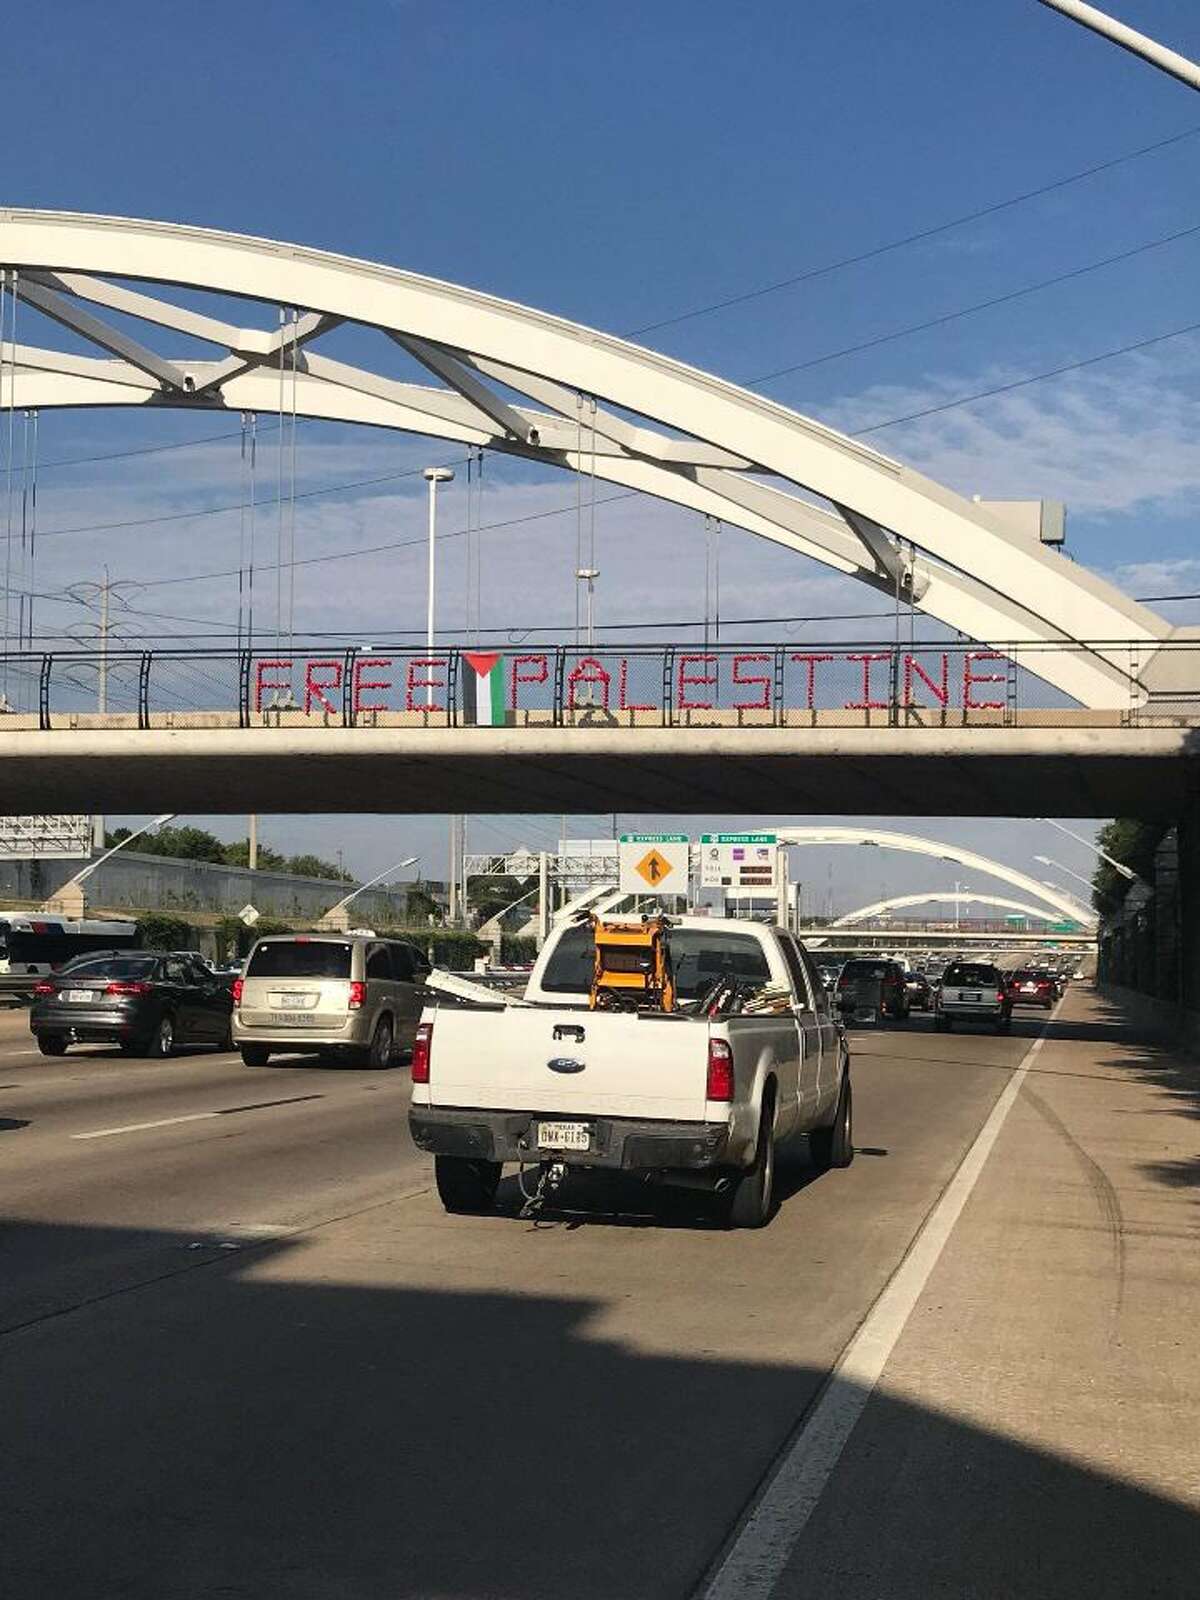 On Tuesday, student activists from the University of Houston hung up large protest signs reading "Free Palestine" and "Hands off Jerusalem" on the highway's iconic bridges. See photos of Gaza protests that have turned deadly his week.